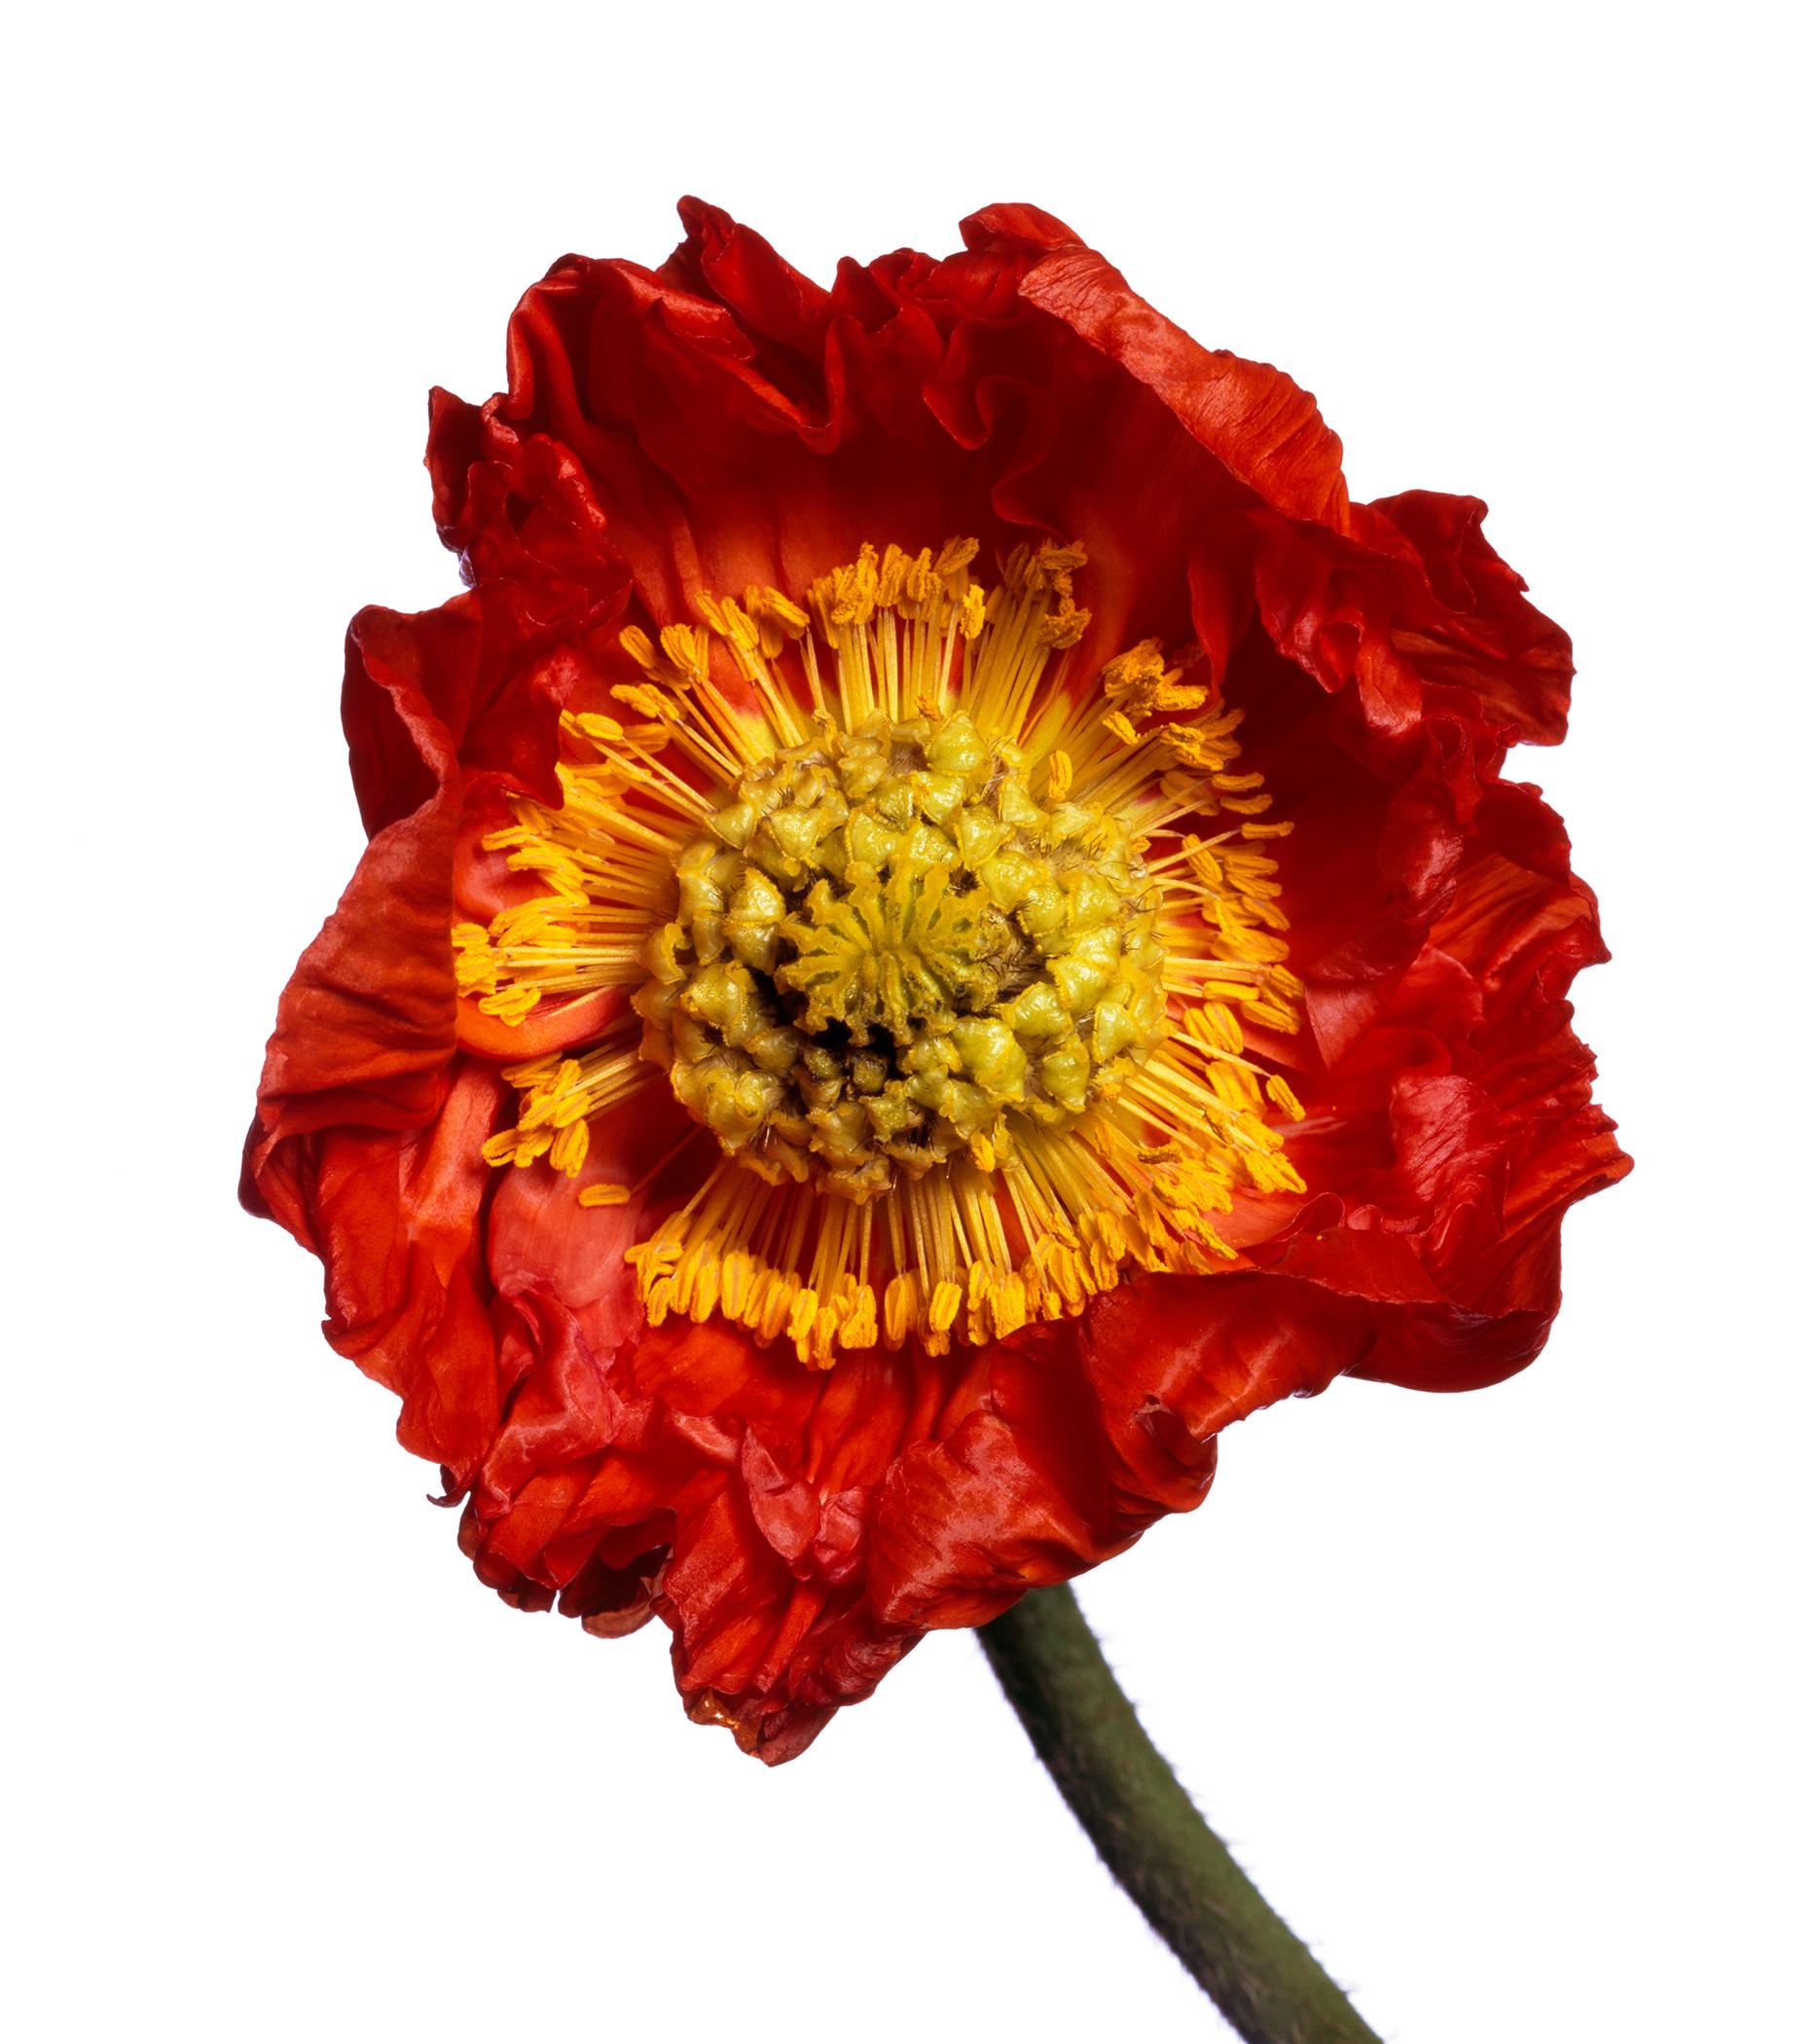 American Iceland Poppy 'R' by Michael Zeppetello For Sale